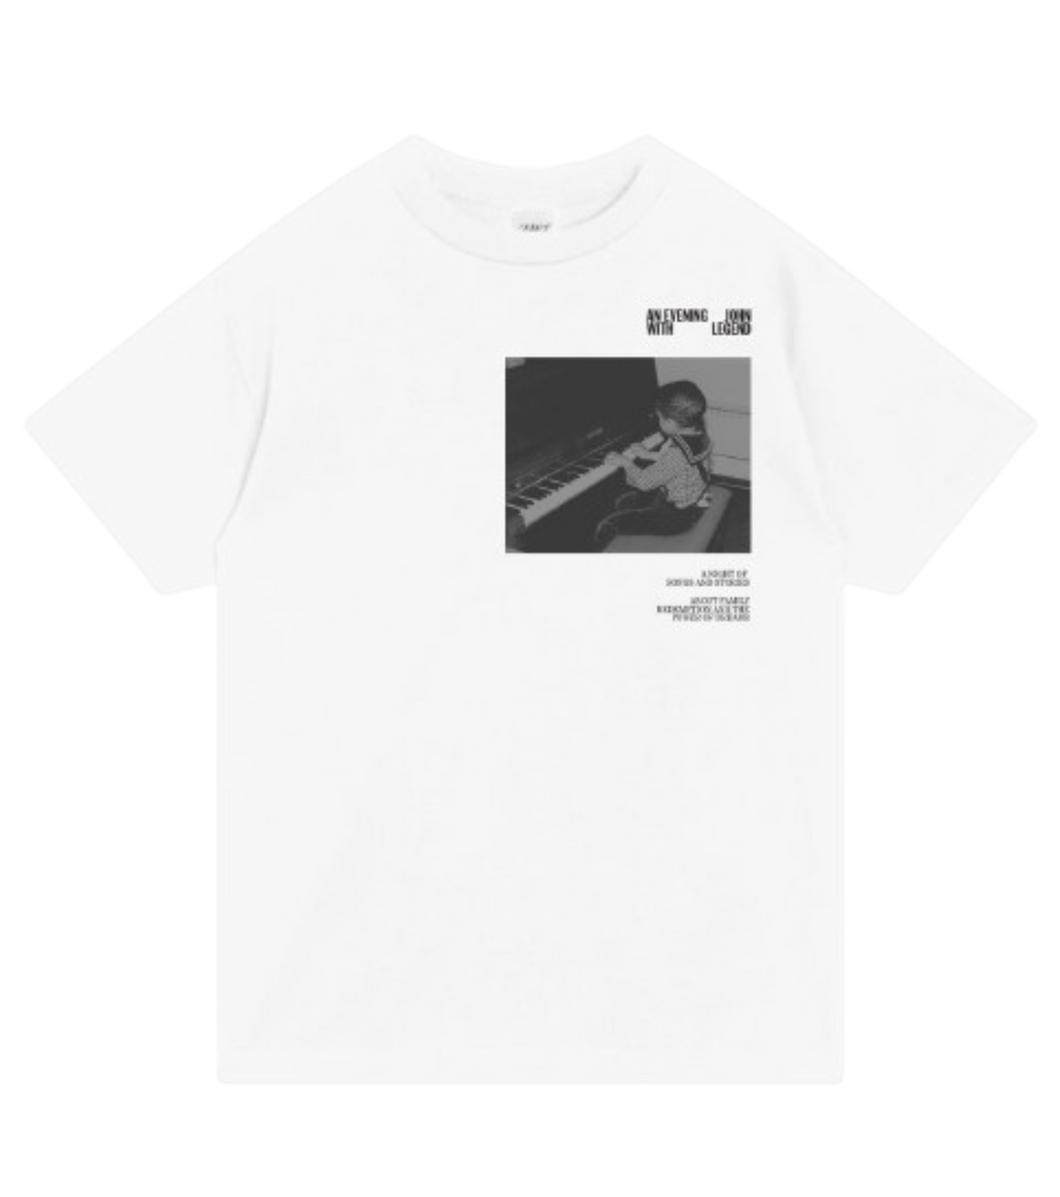 'An Evening With' T-Shirt (White)